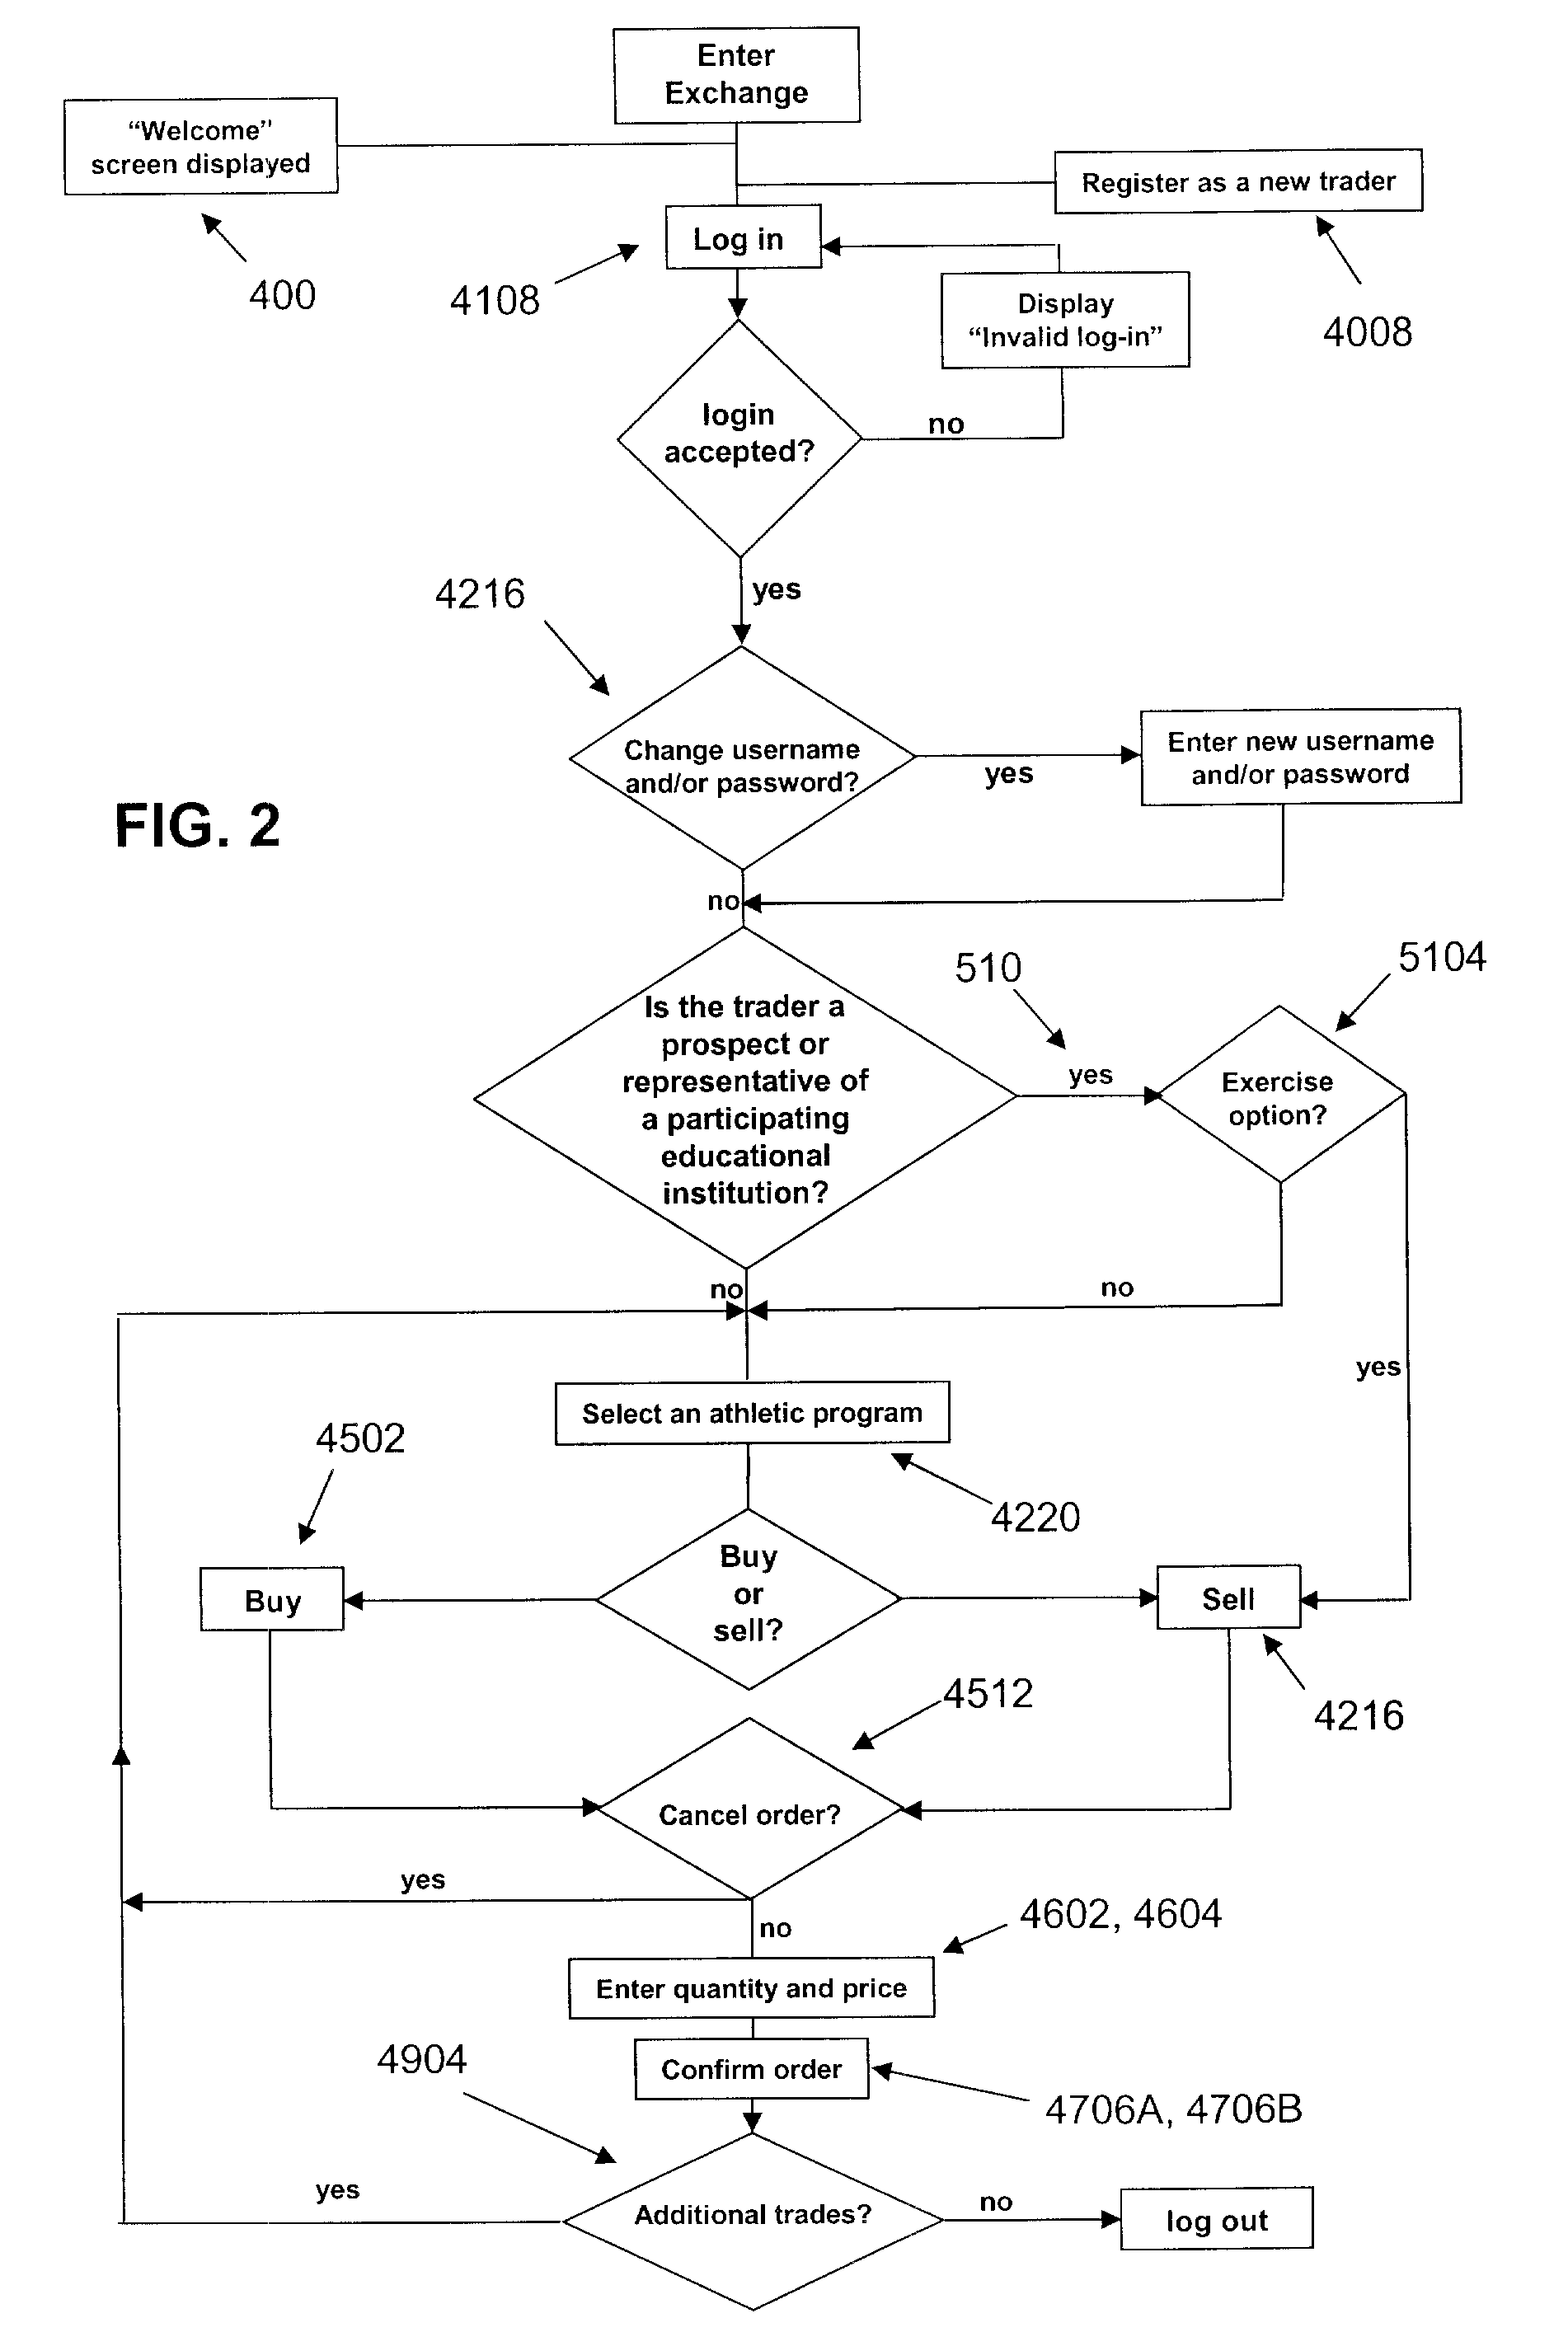 Trading system and method for institutional athletic and education programs